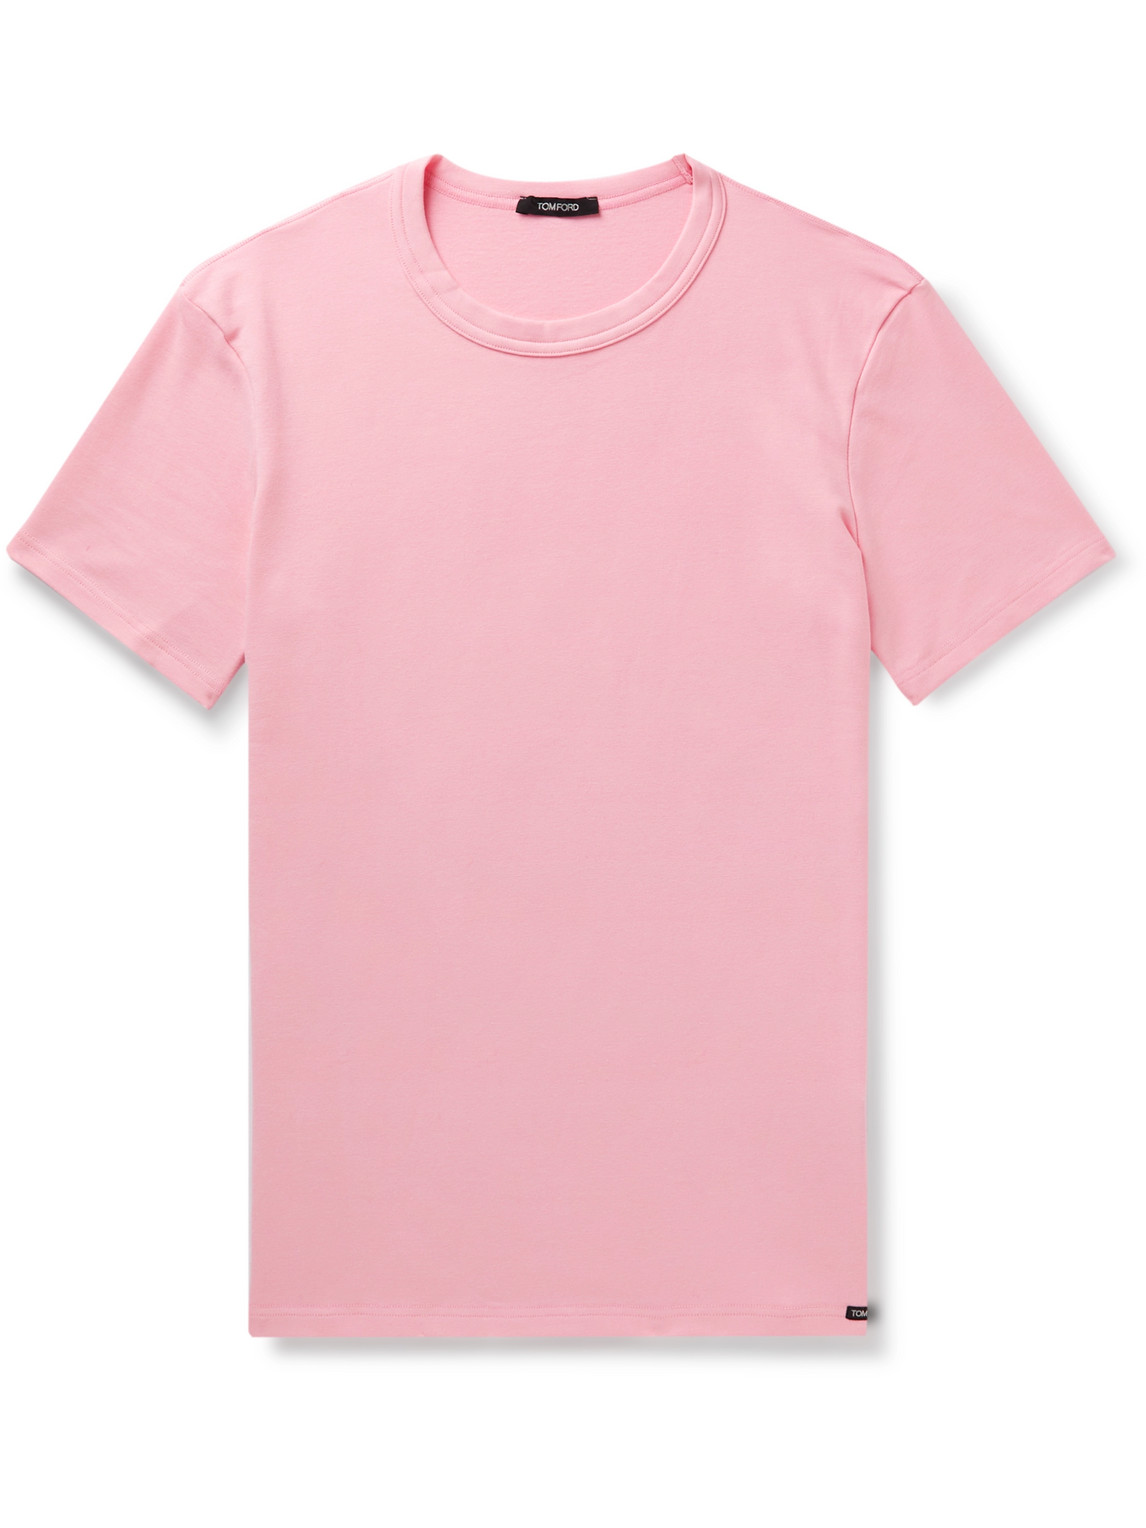 TOM FORD SLIM-FIT STRETCH-COTTON JERSEY T-SHIRT